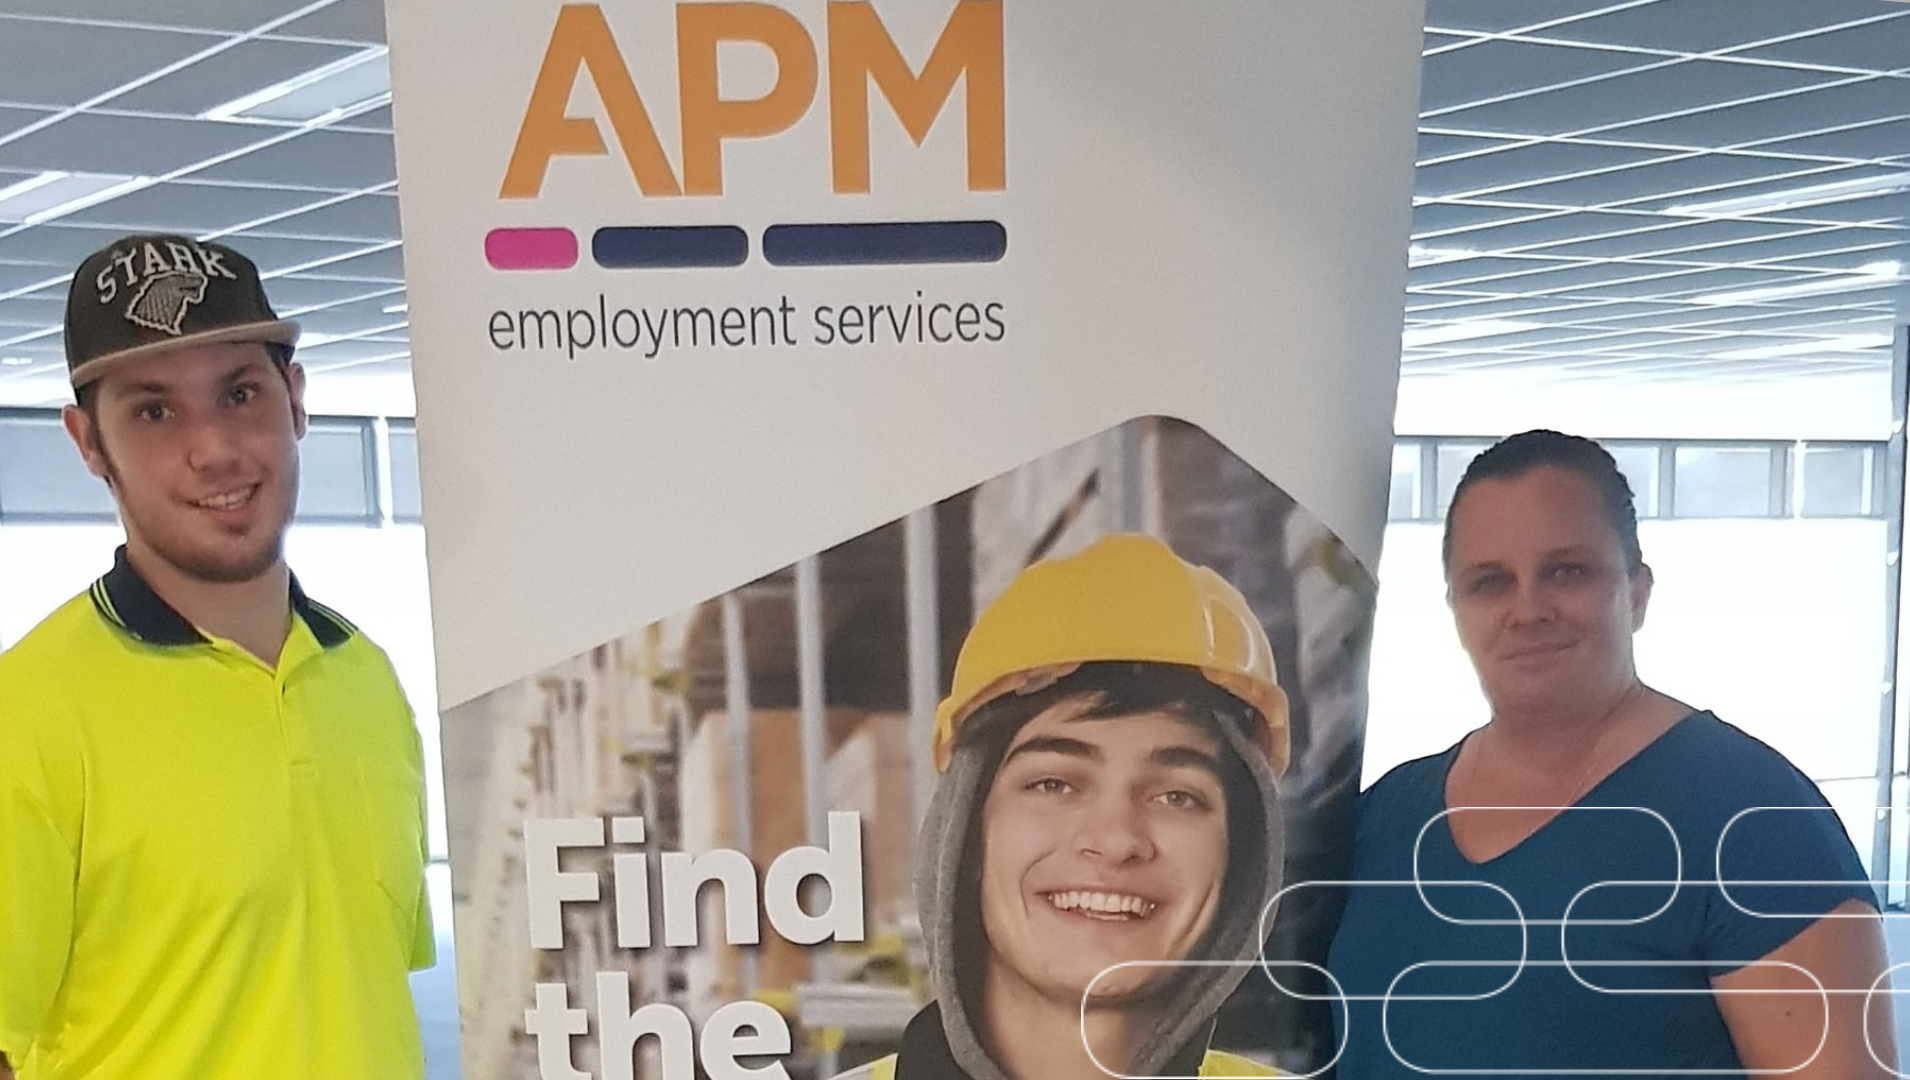 Riley astanding in front of an APM banner in his work uniform smiling